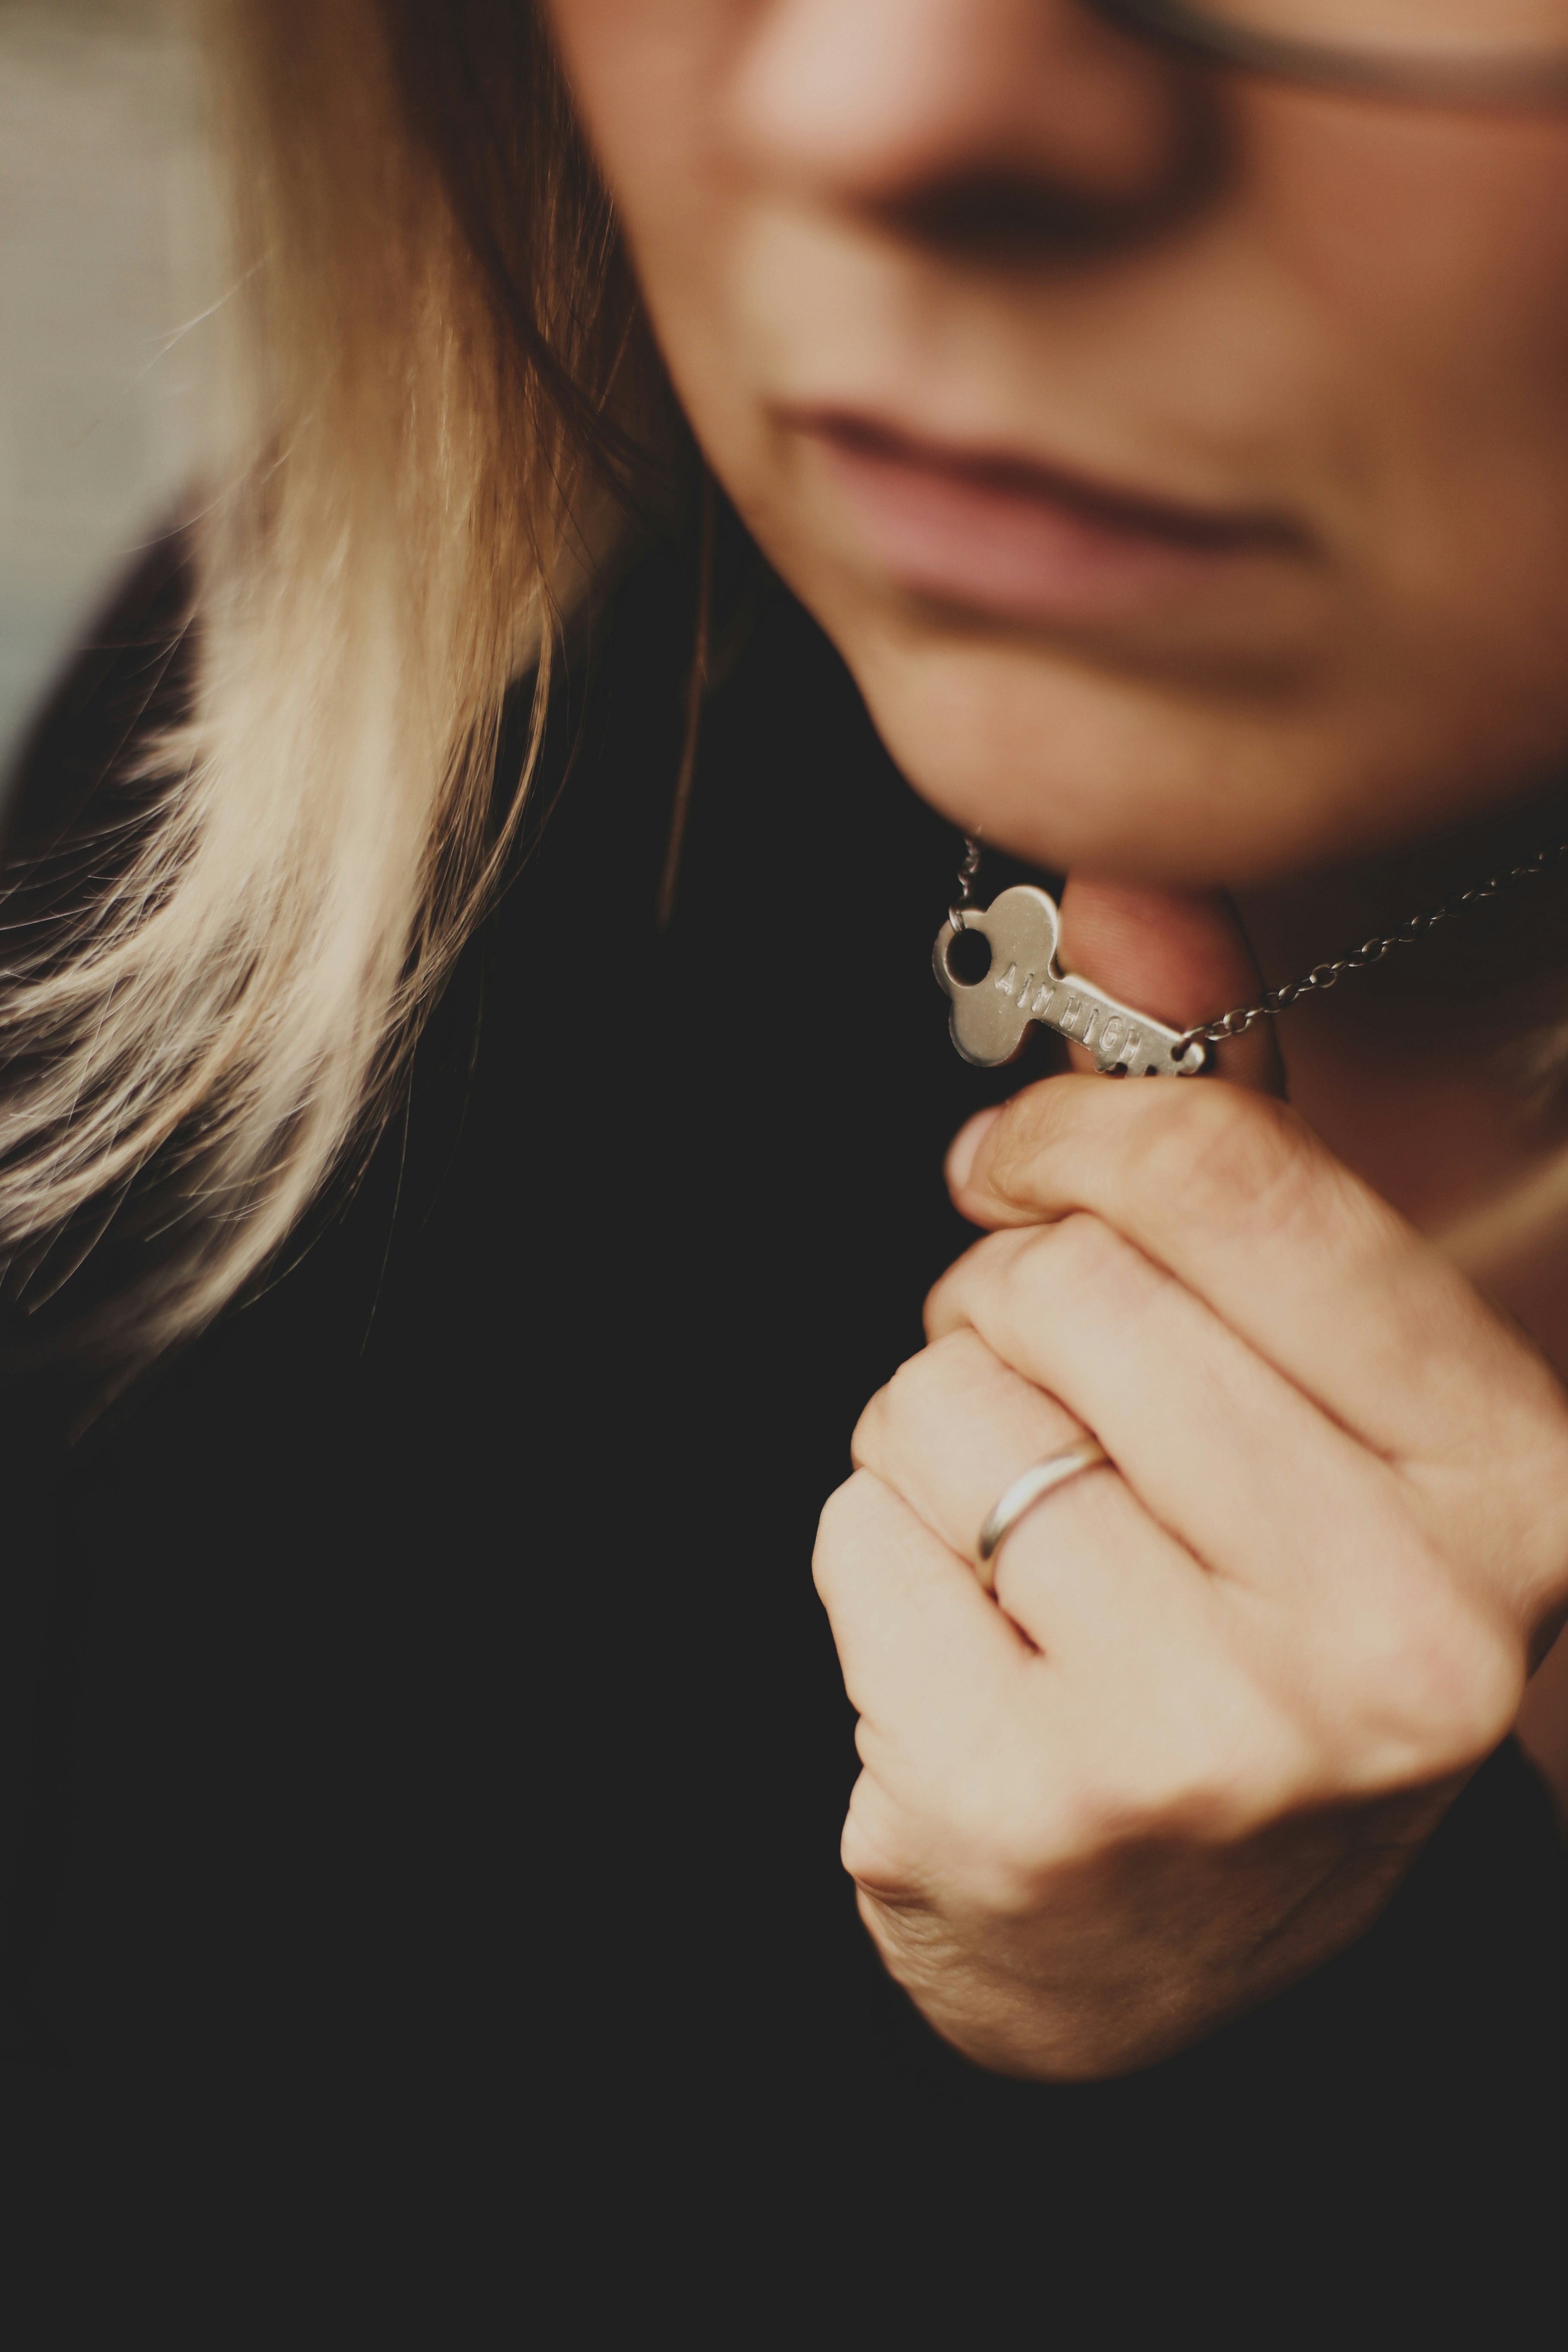 woman in black top holding silver-colored necklace